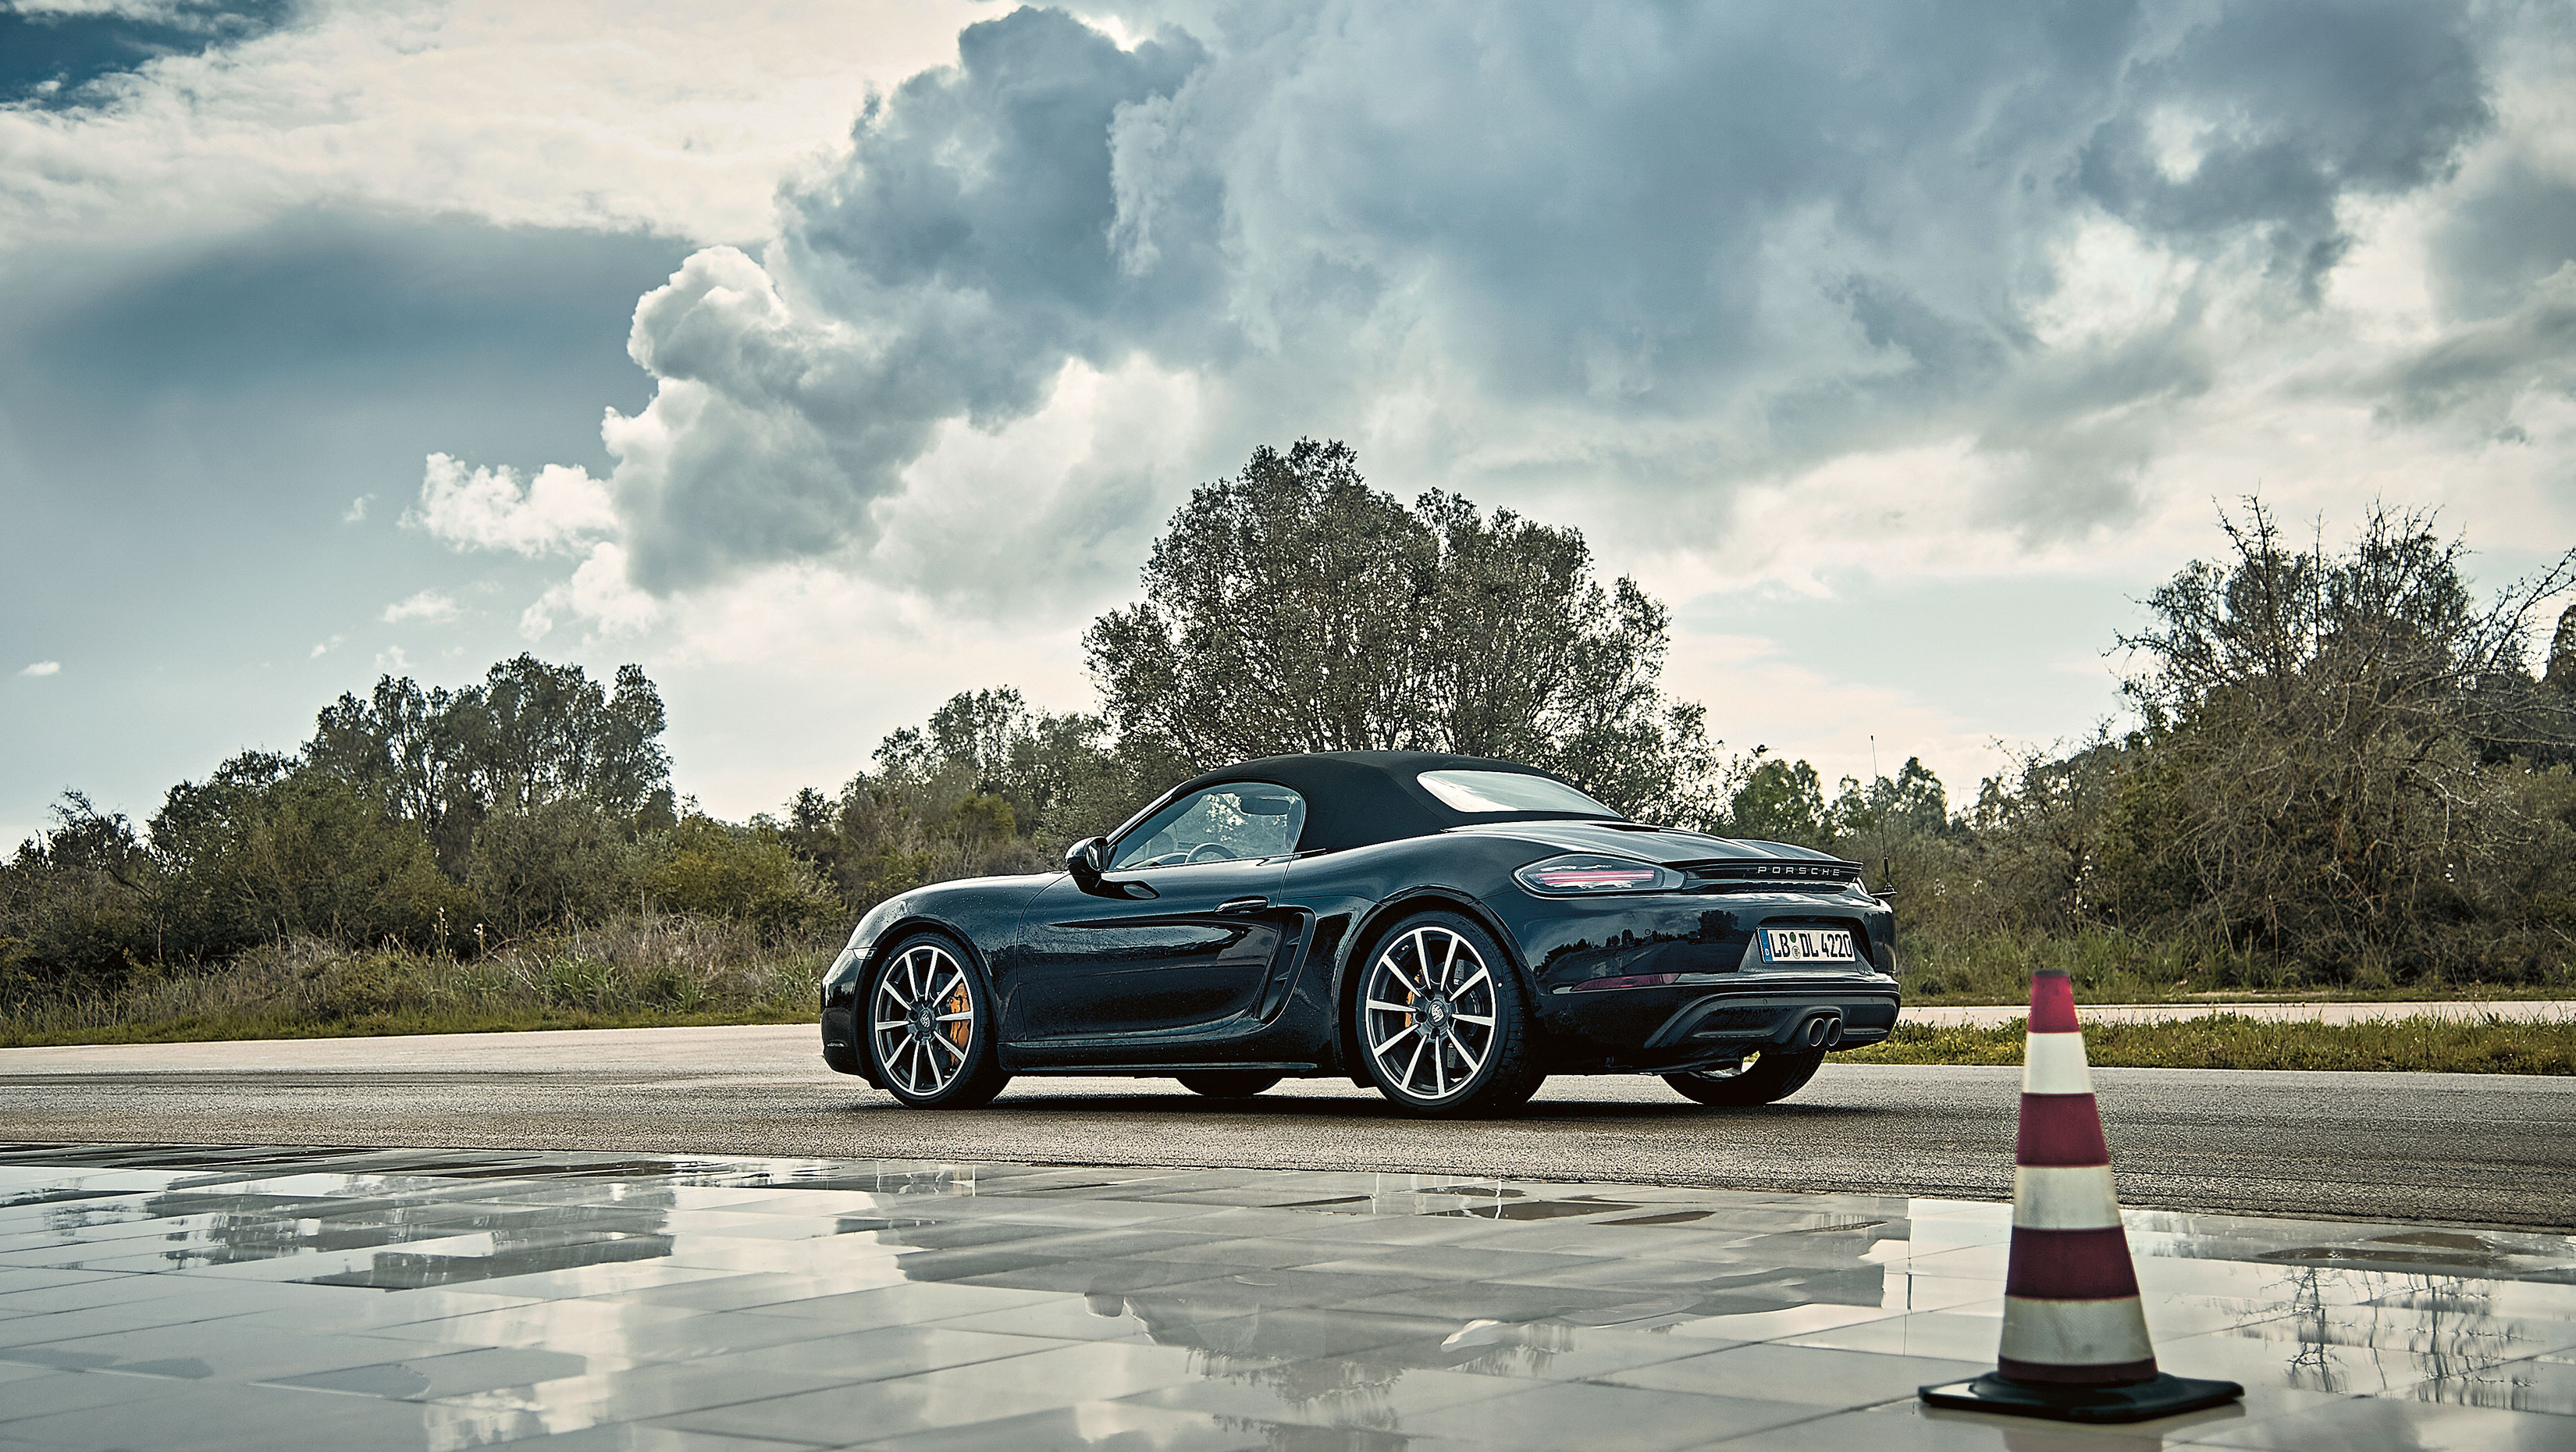 2016 Porsche 718 Boxster parked by a puddle reflecting the sky